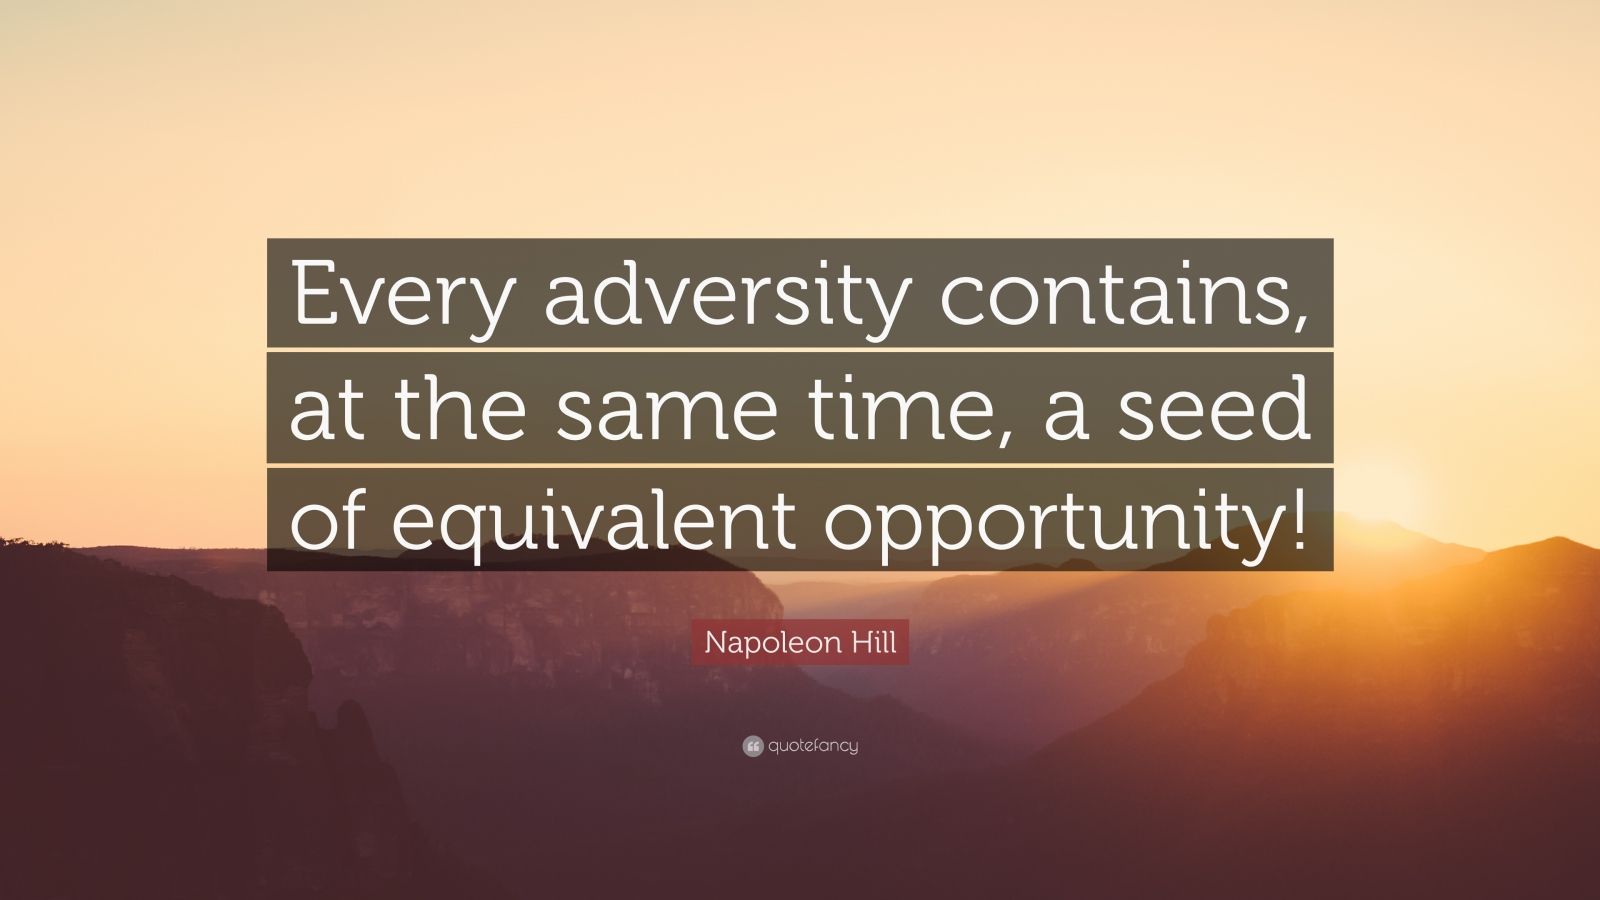 Napoleon Hill Quote “Every adversity contains, at the